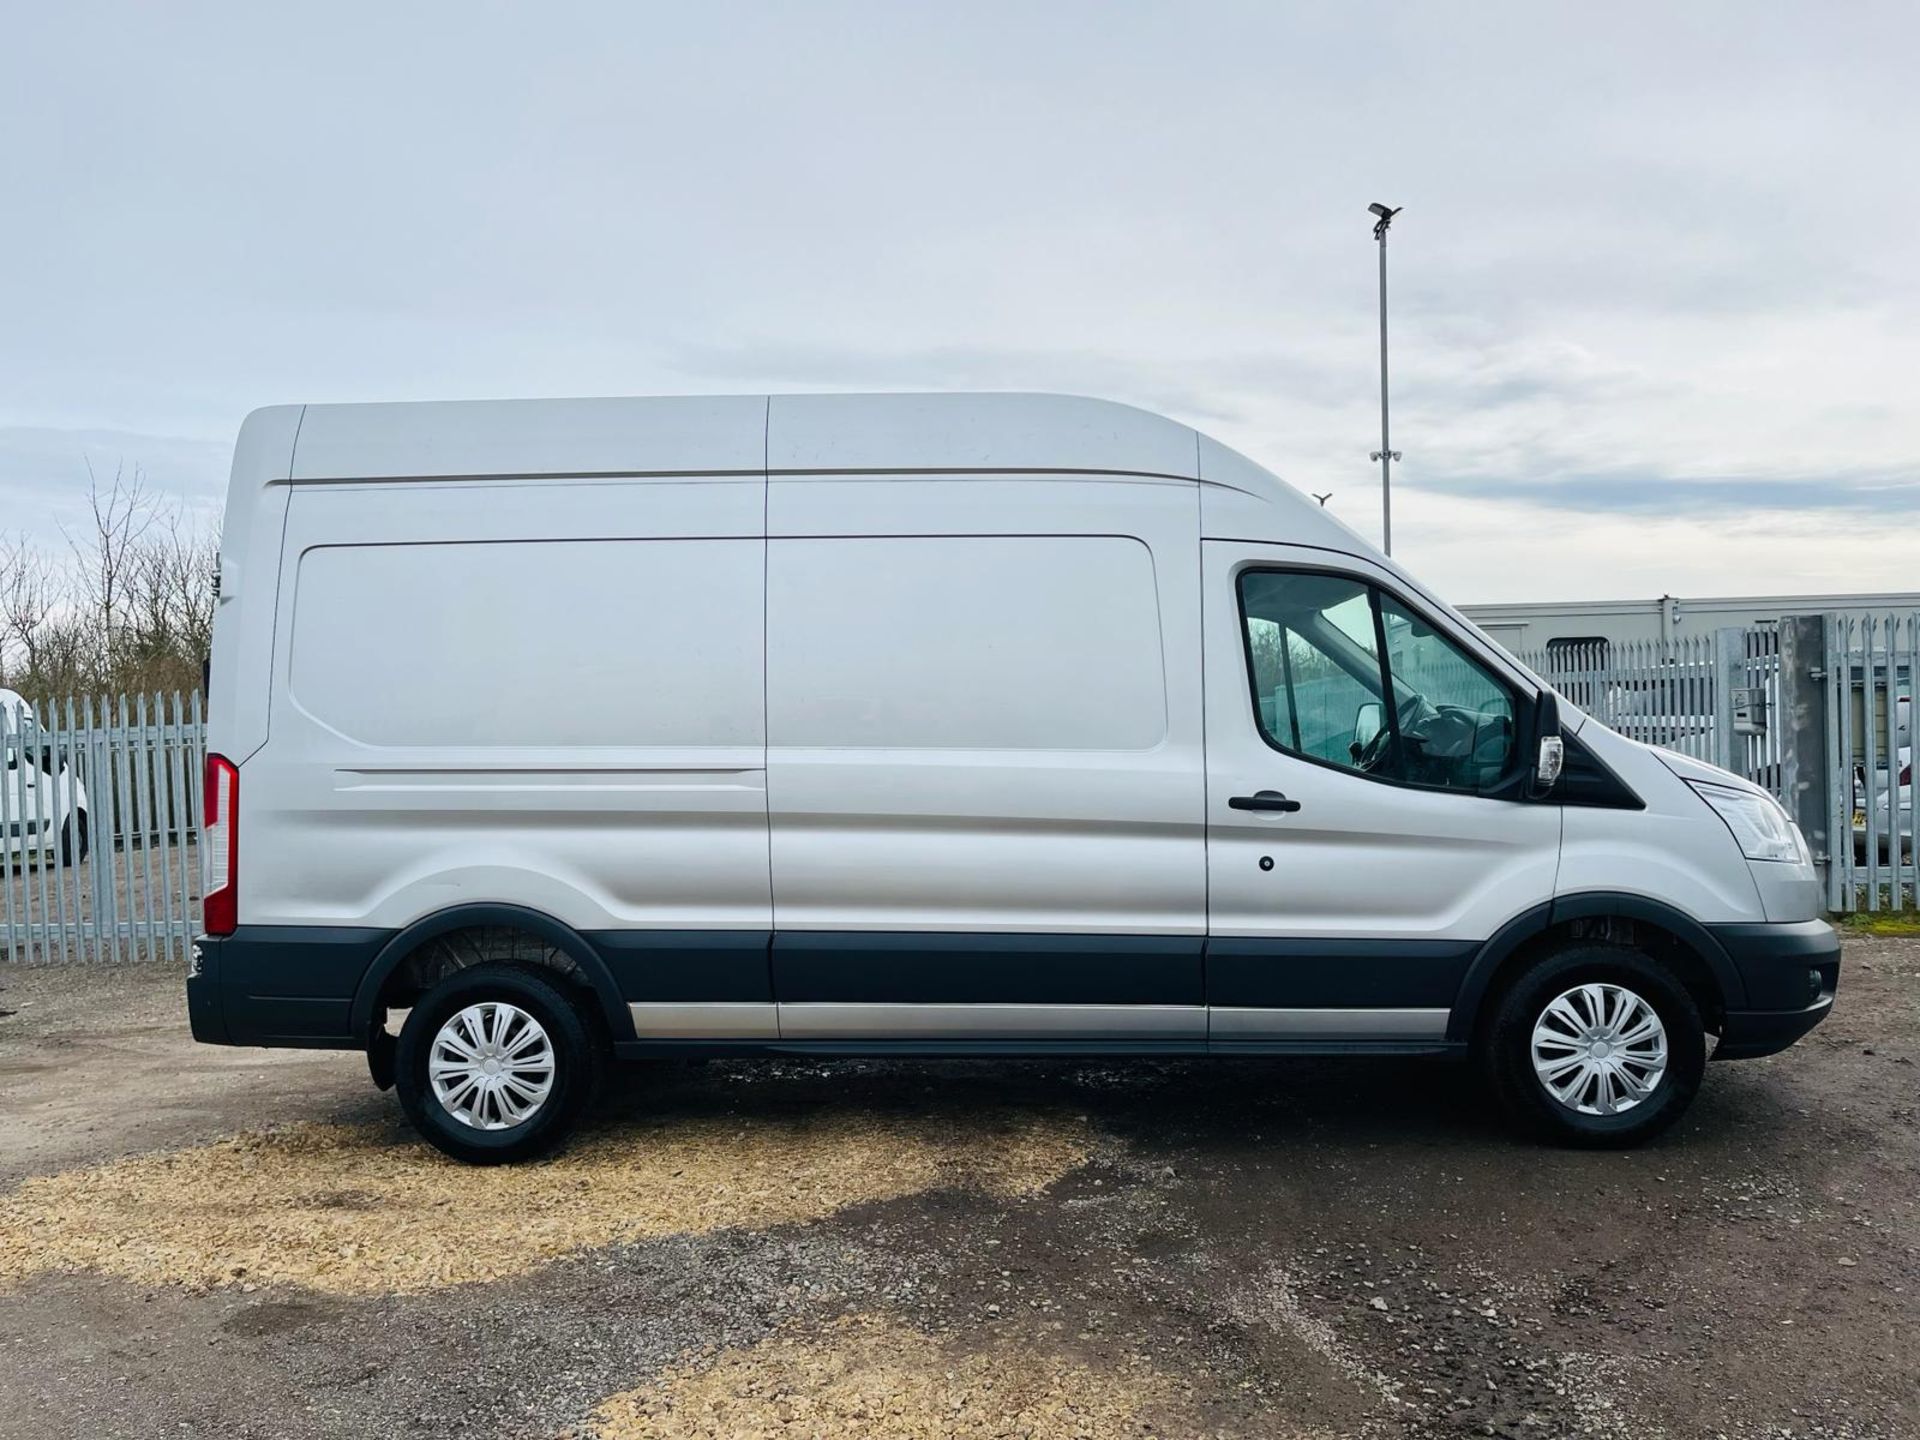 Ford Transit Trend 350 TDCI 125 2.2 L3 H3 2014 '64 Reg' - Parking sensors - Air Conditioning - Image 13 of 27